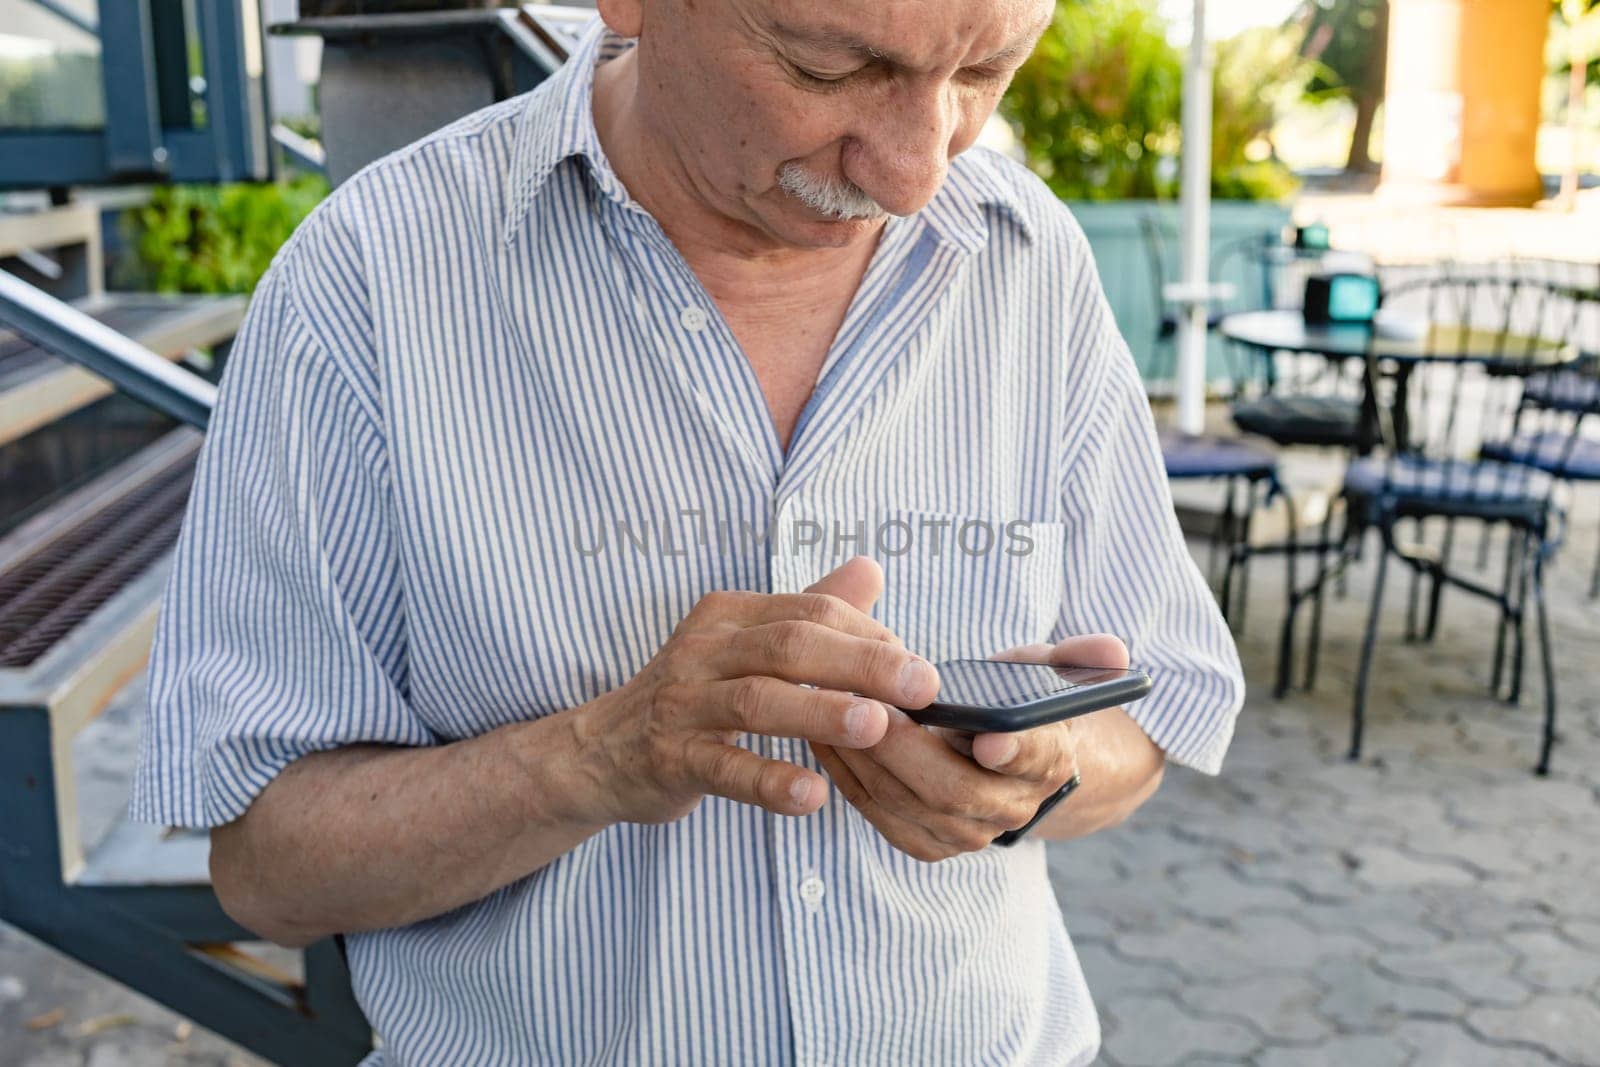 Elderly man is holding a mobile phone in his hands by palinchak